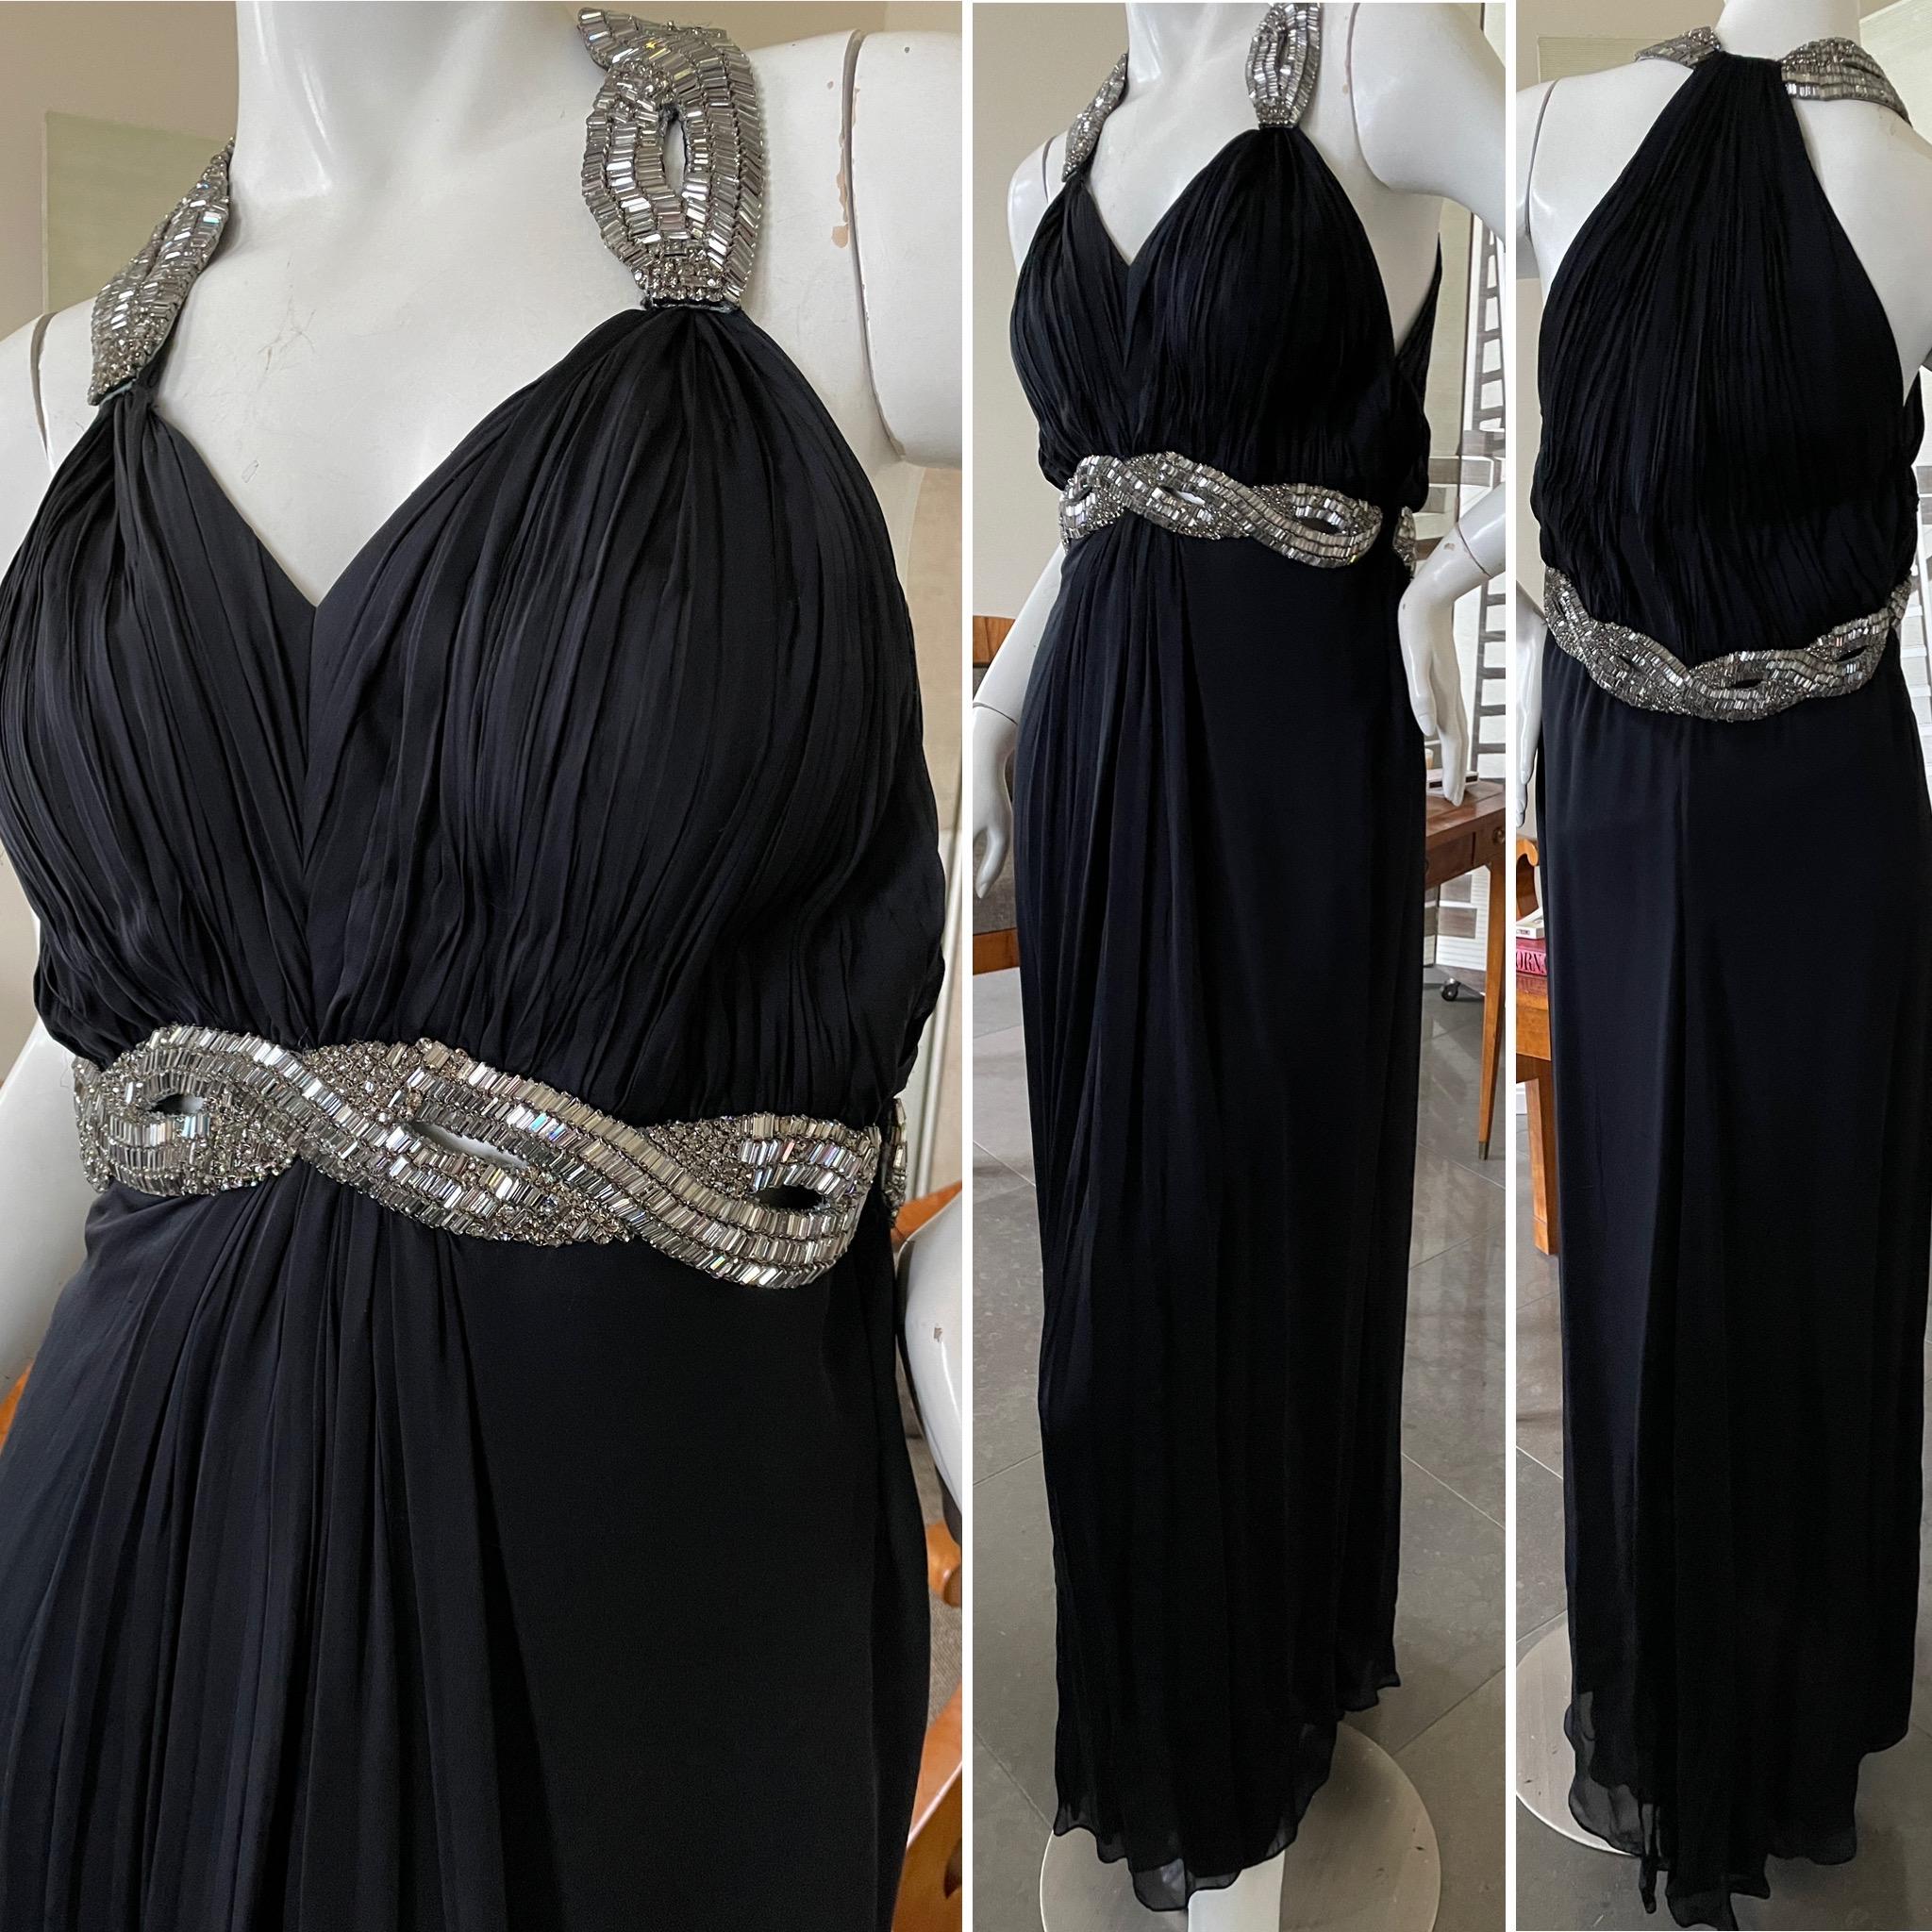 
Roberto Cavalli Vintage Black Evening Dress w Gobsmacking Crystal Baguette Trim
 So pretty, please use the zoom feature to see details.
Size 42, the size and care tag removed
 Bust 36